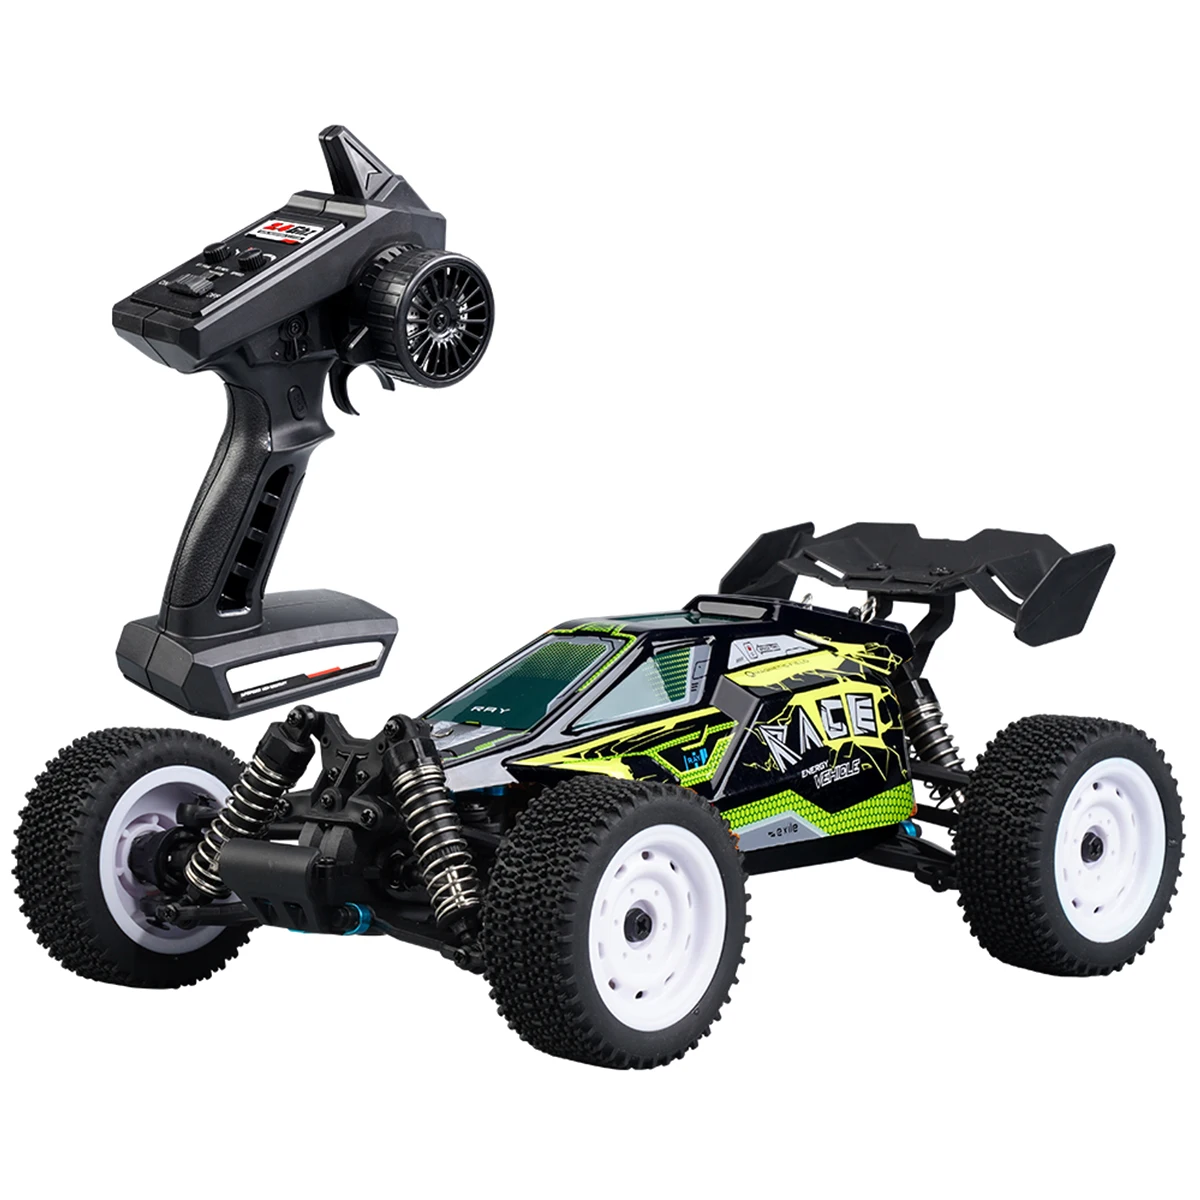 RC Cars hot JJRC 4WD 1:16 RC Car Toy 2.4G 35km/h Remote Control Racing Drift Off-road Vehicle Electric Model Four-wheel High-speed Drive best RC Cars RC Cars